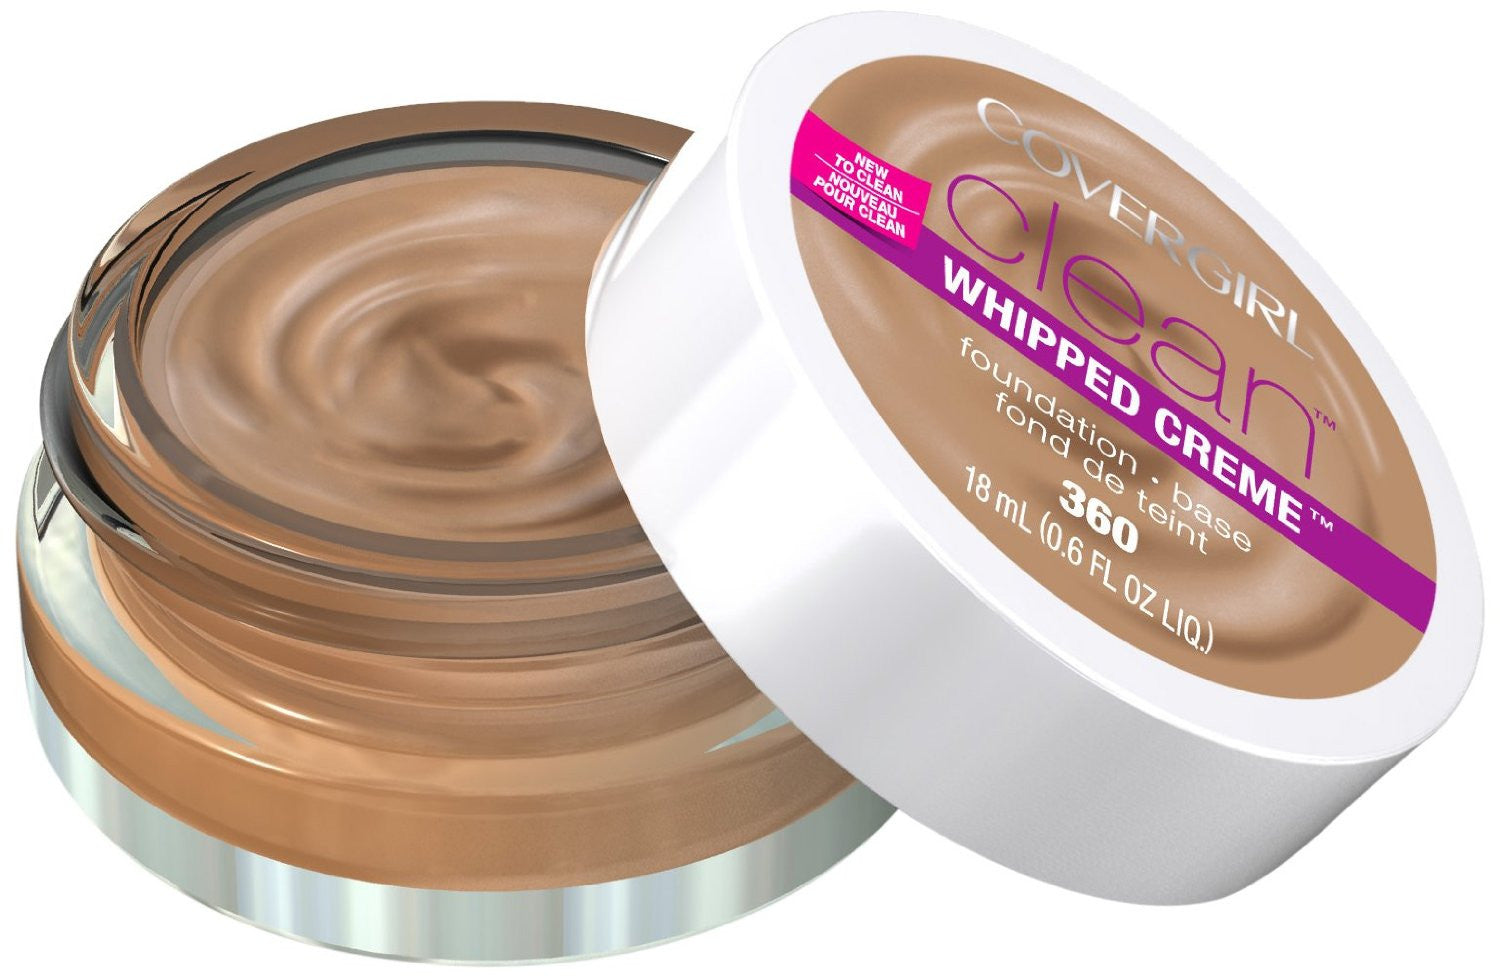 CoverGirl Clean Whipped Creme Foundation - ADDROS.COM